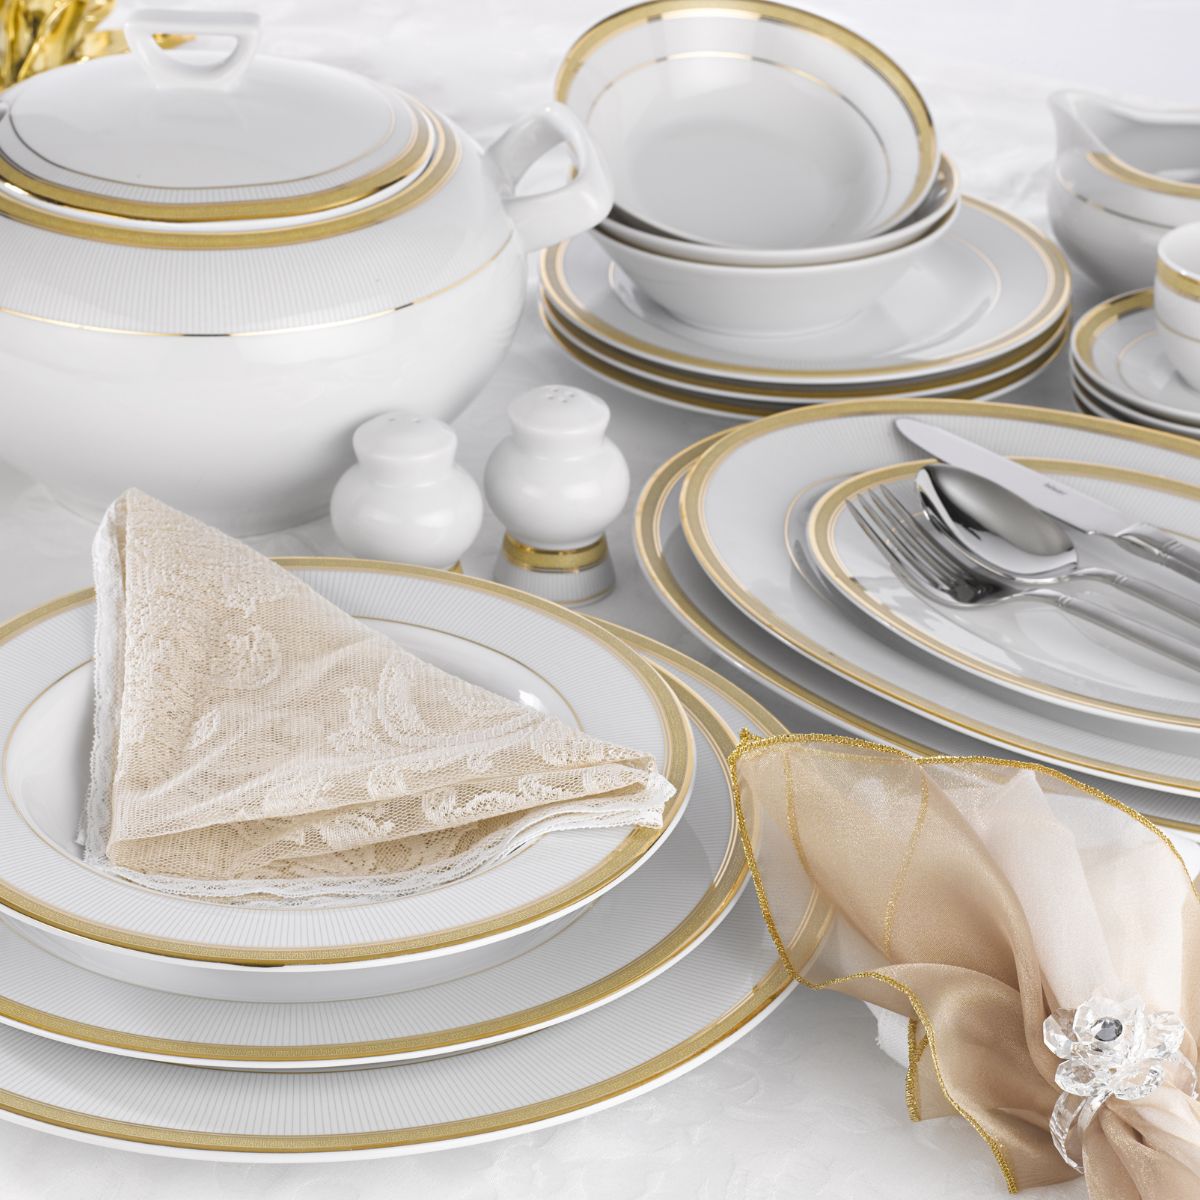 Set of white dinnerware with gold edging.